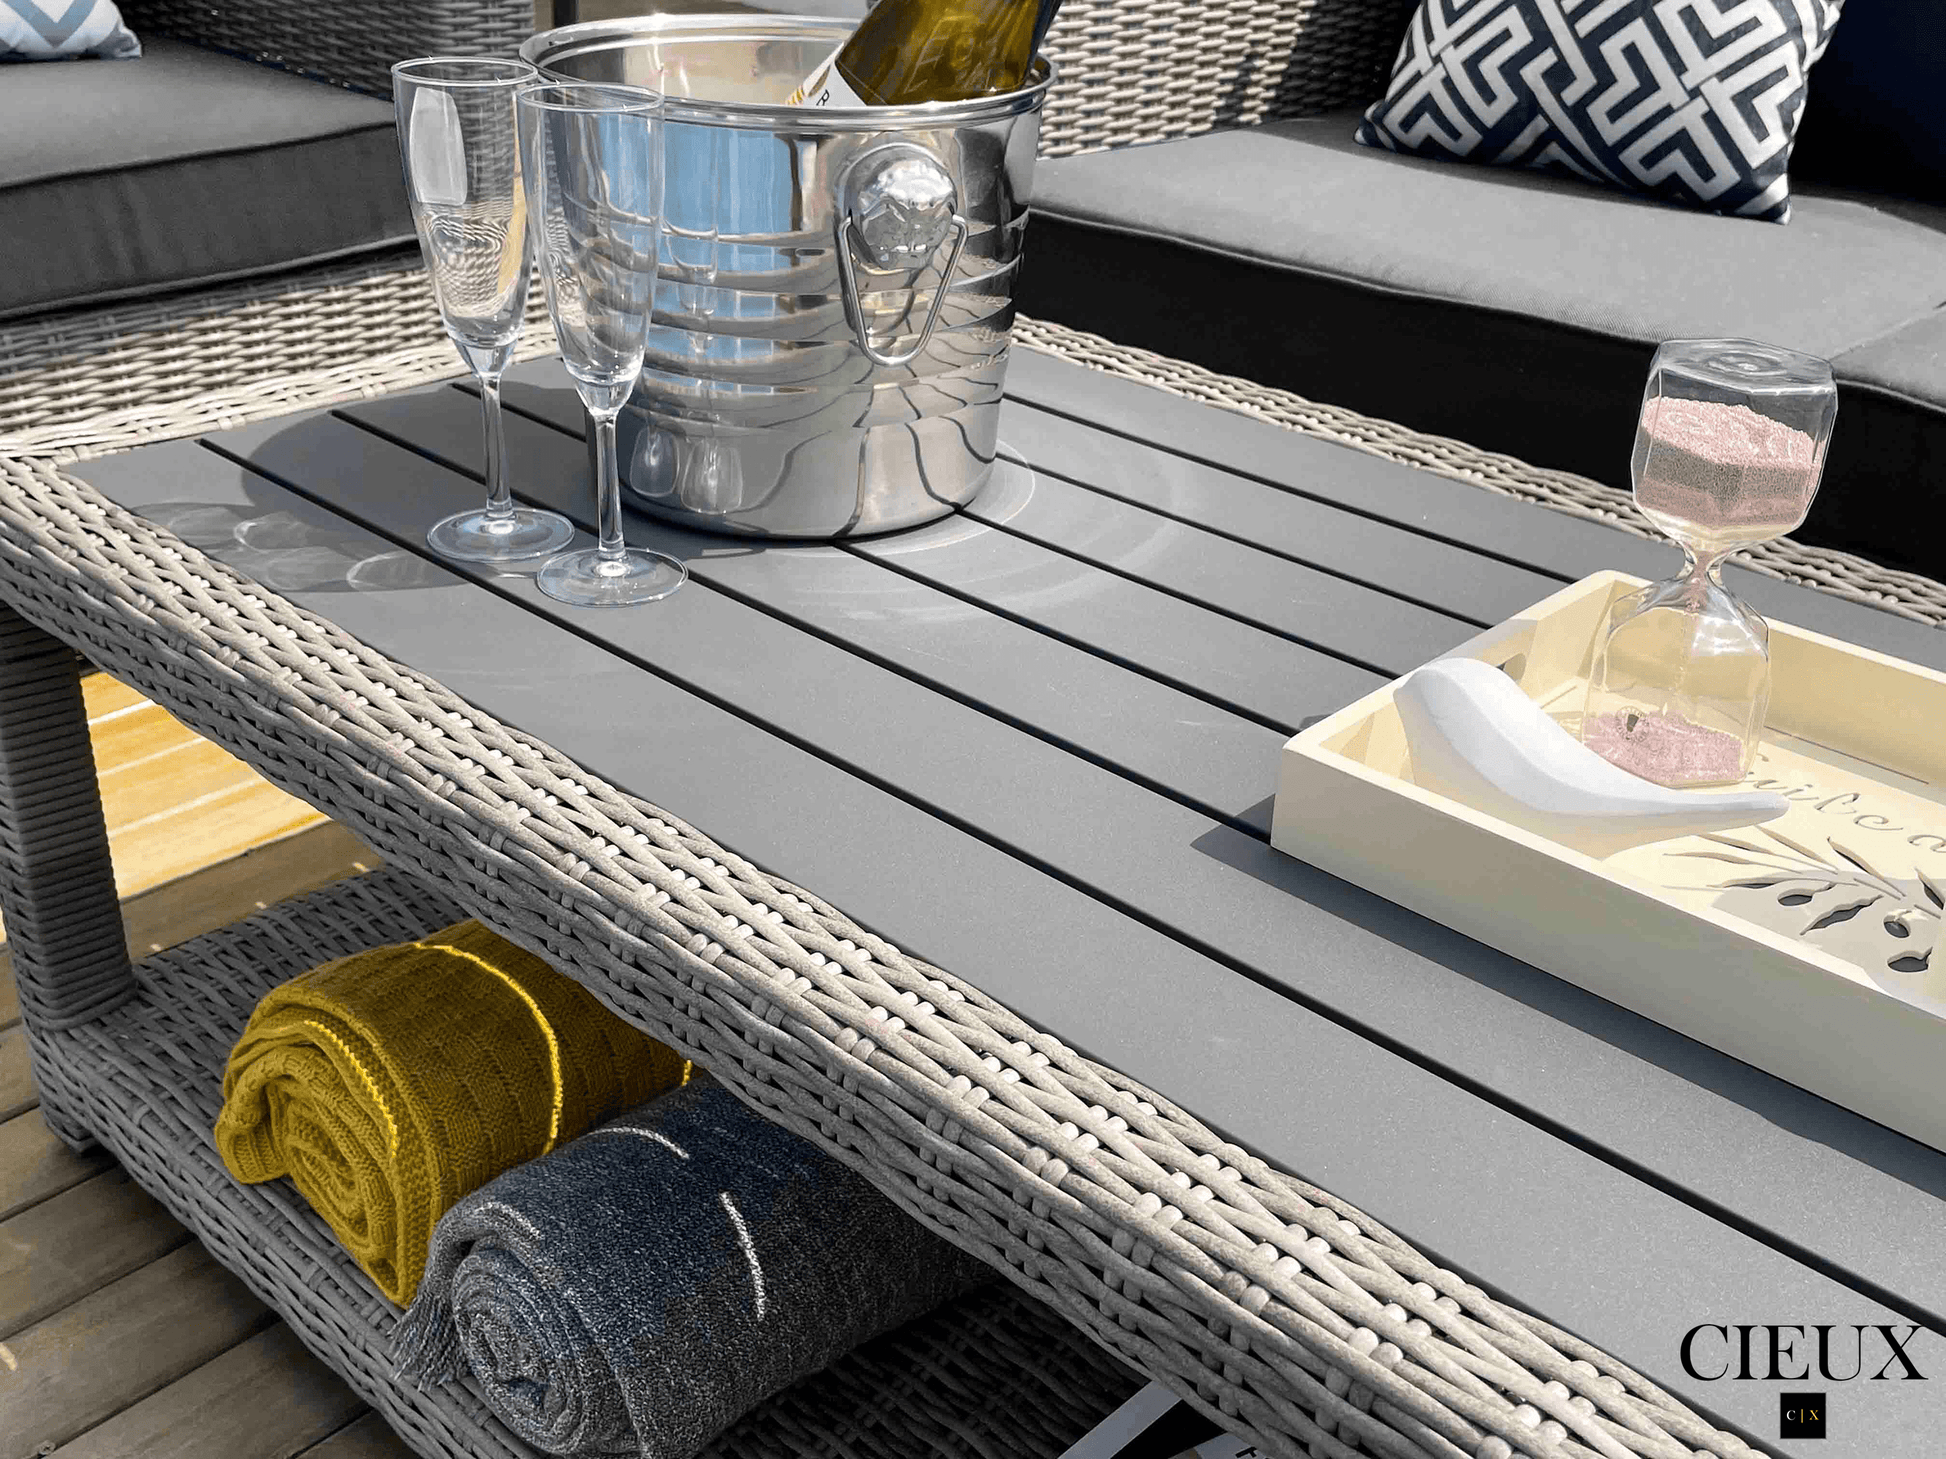 Pending - Cieux Cannes Outdoor Patio Wicker Sofa Conversation Set in Grey with Sunbrella Cushions - Available in 2 Colours